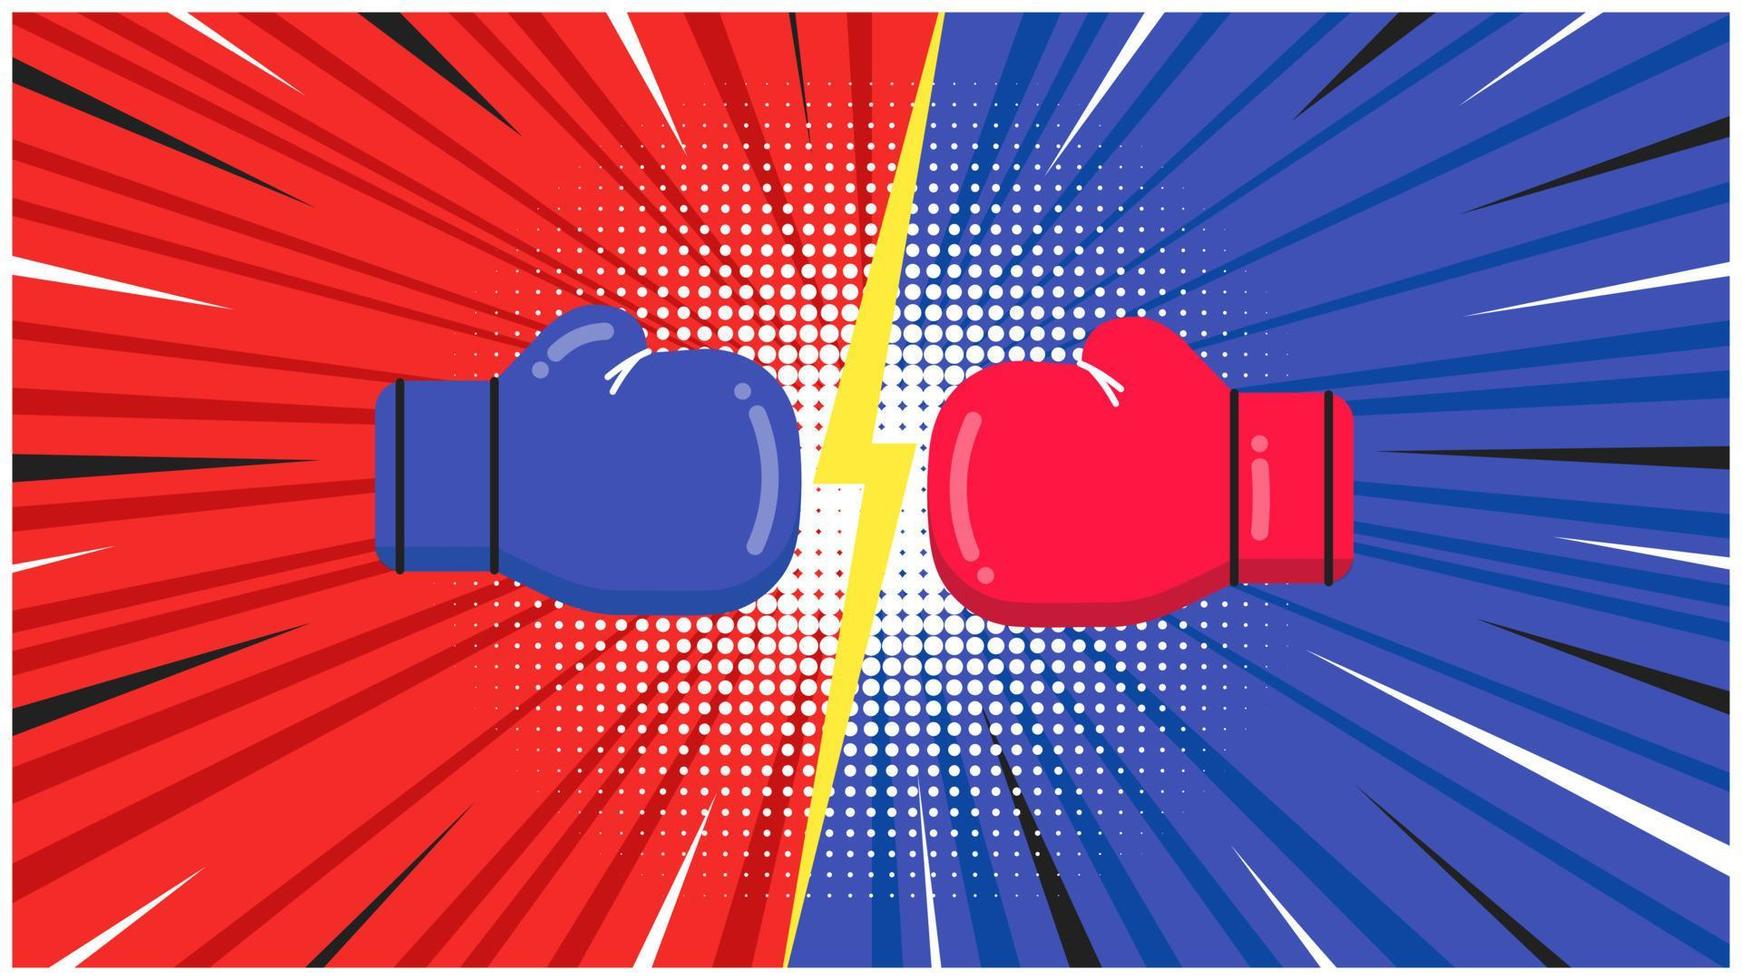 Versus screen with boxing gloves flat style design vector illustration. Fight screen for battle or gaming. Red versus blue. Fight